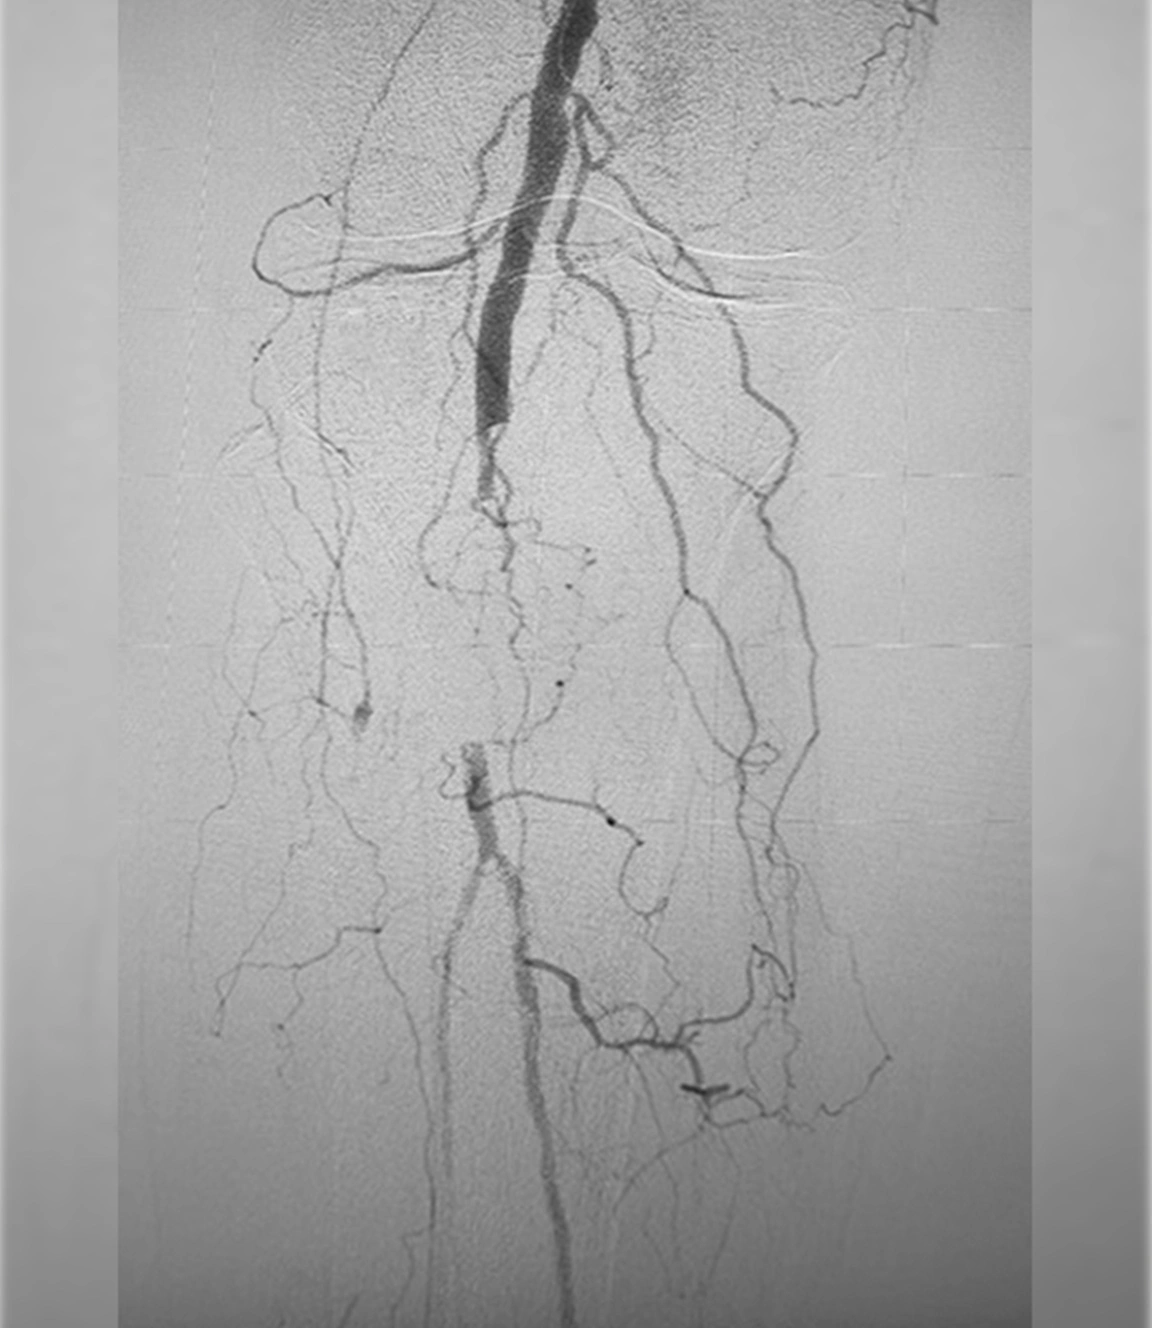 Angiographic image of occluded popliteal artery